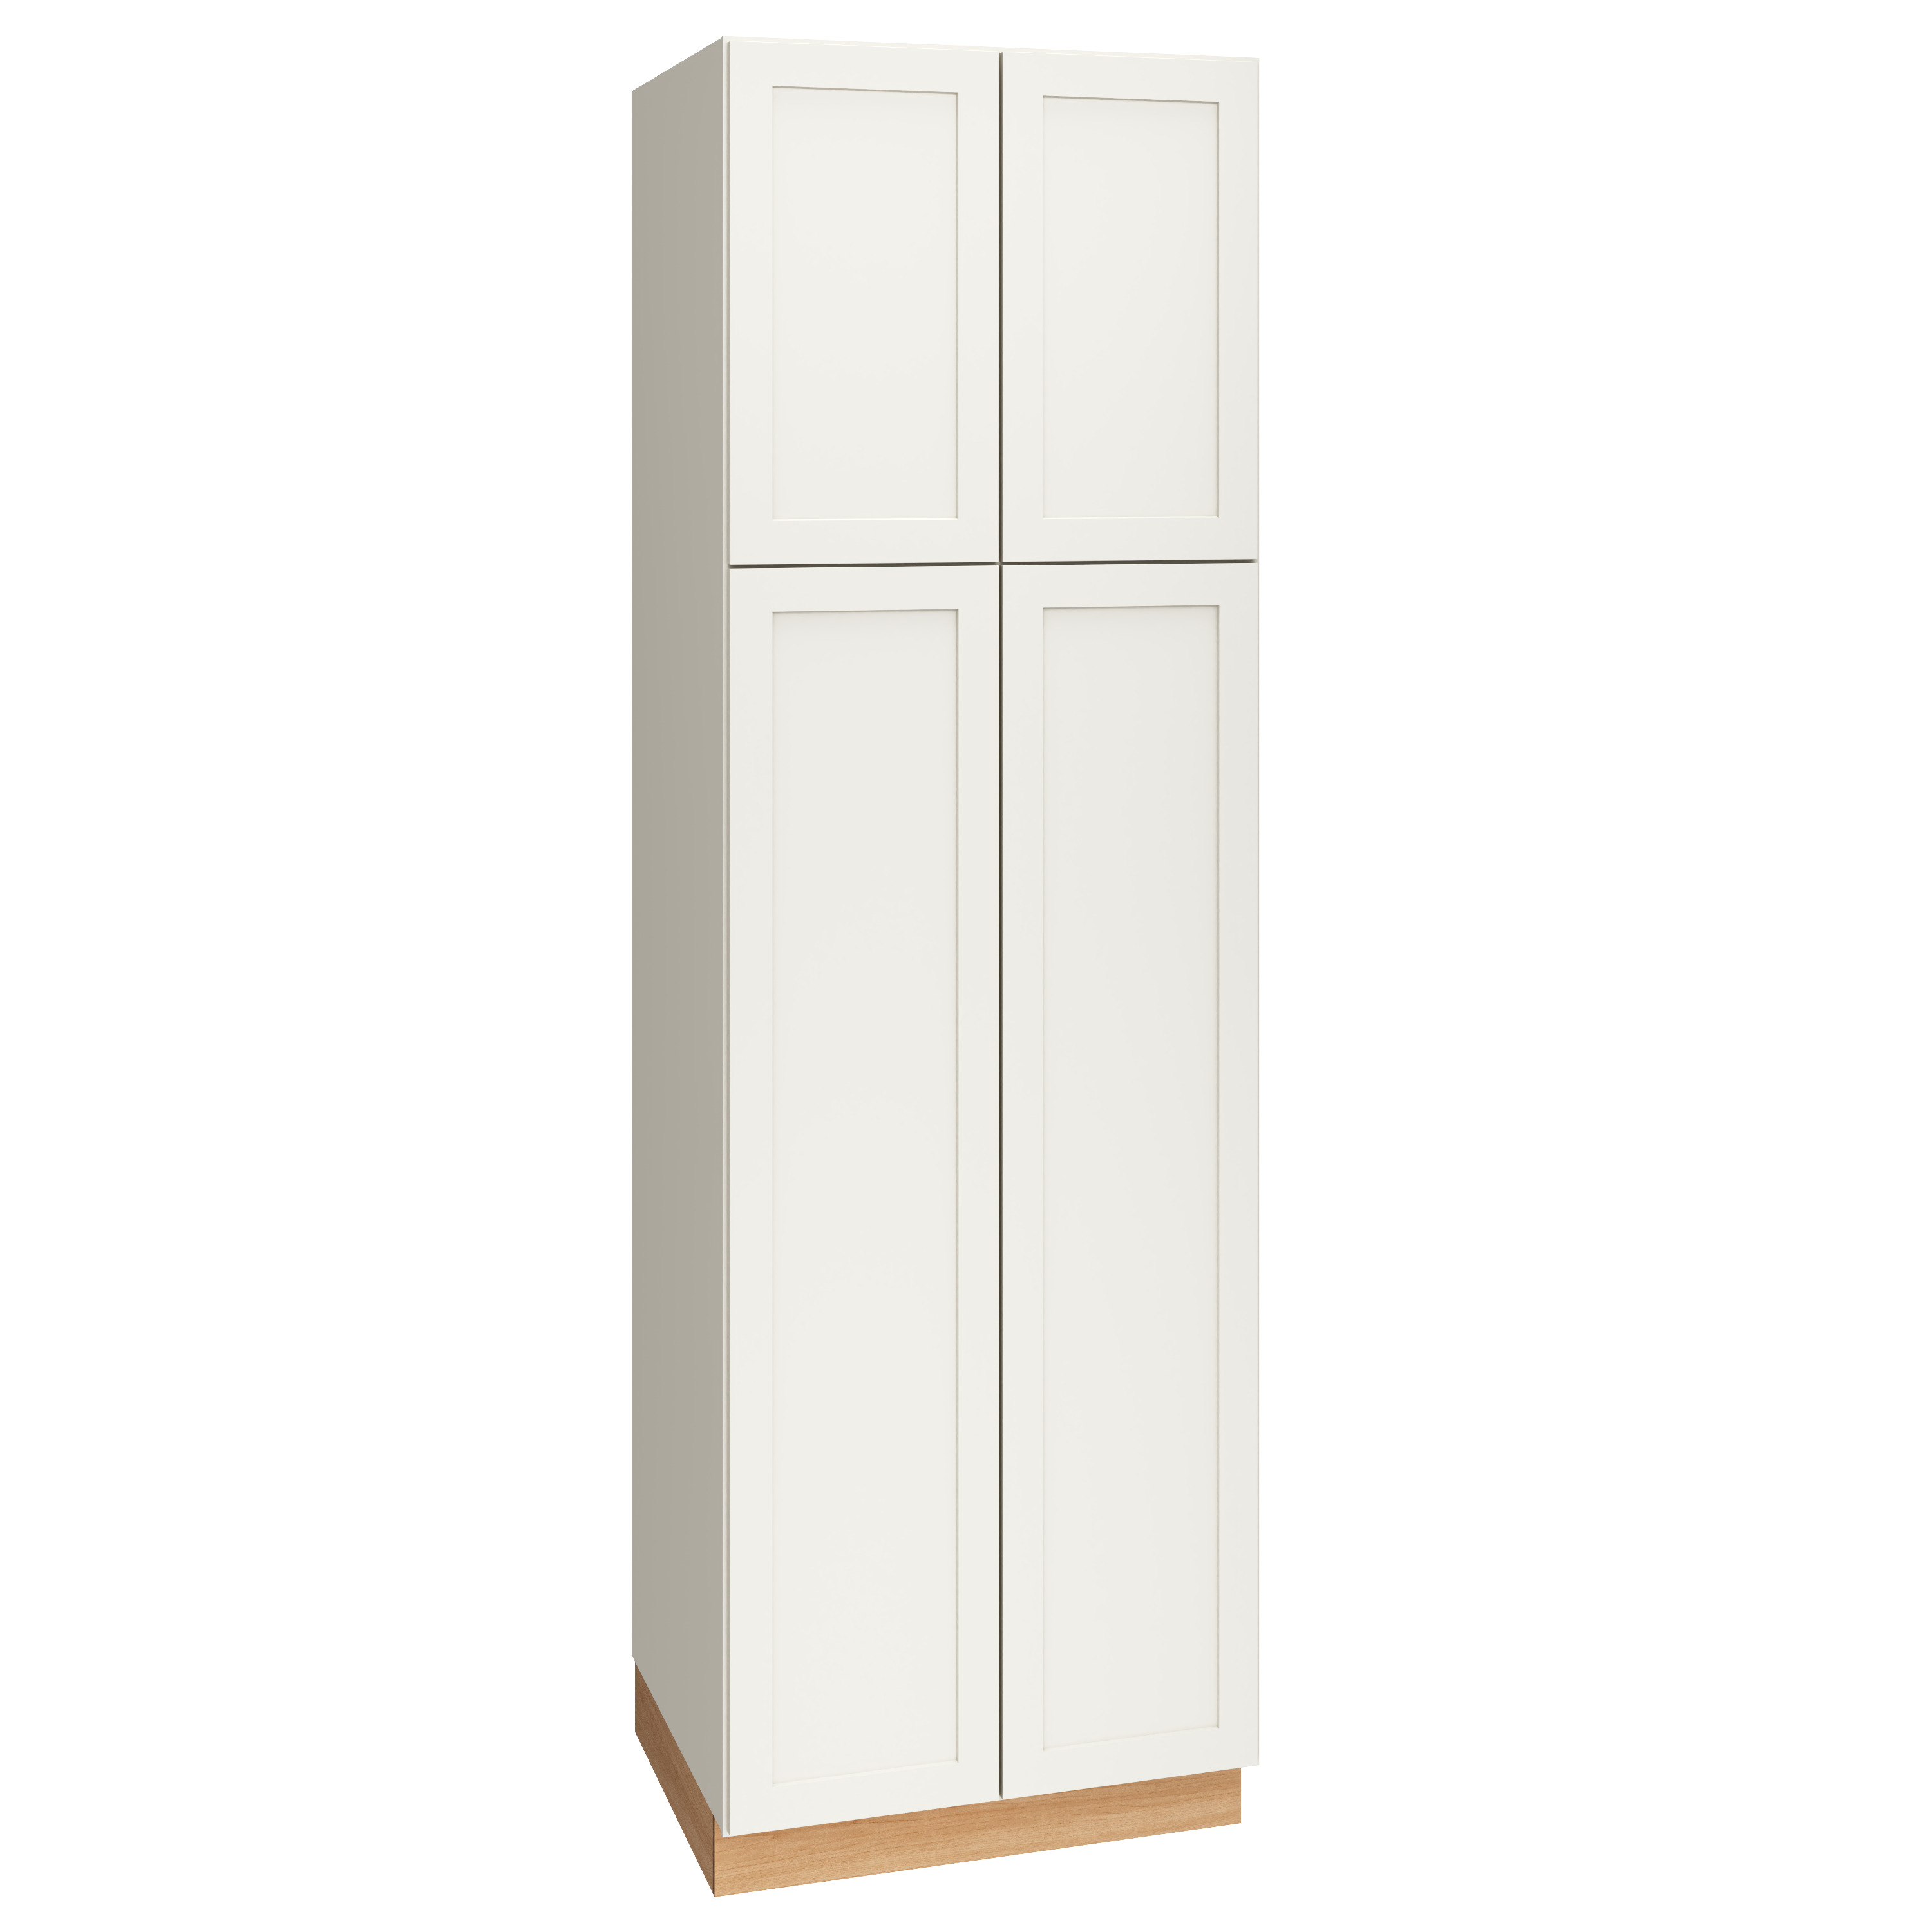 Utility Cabinet Width With Double Doors in Snow